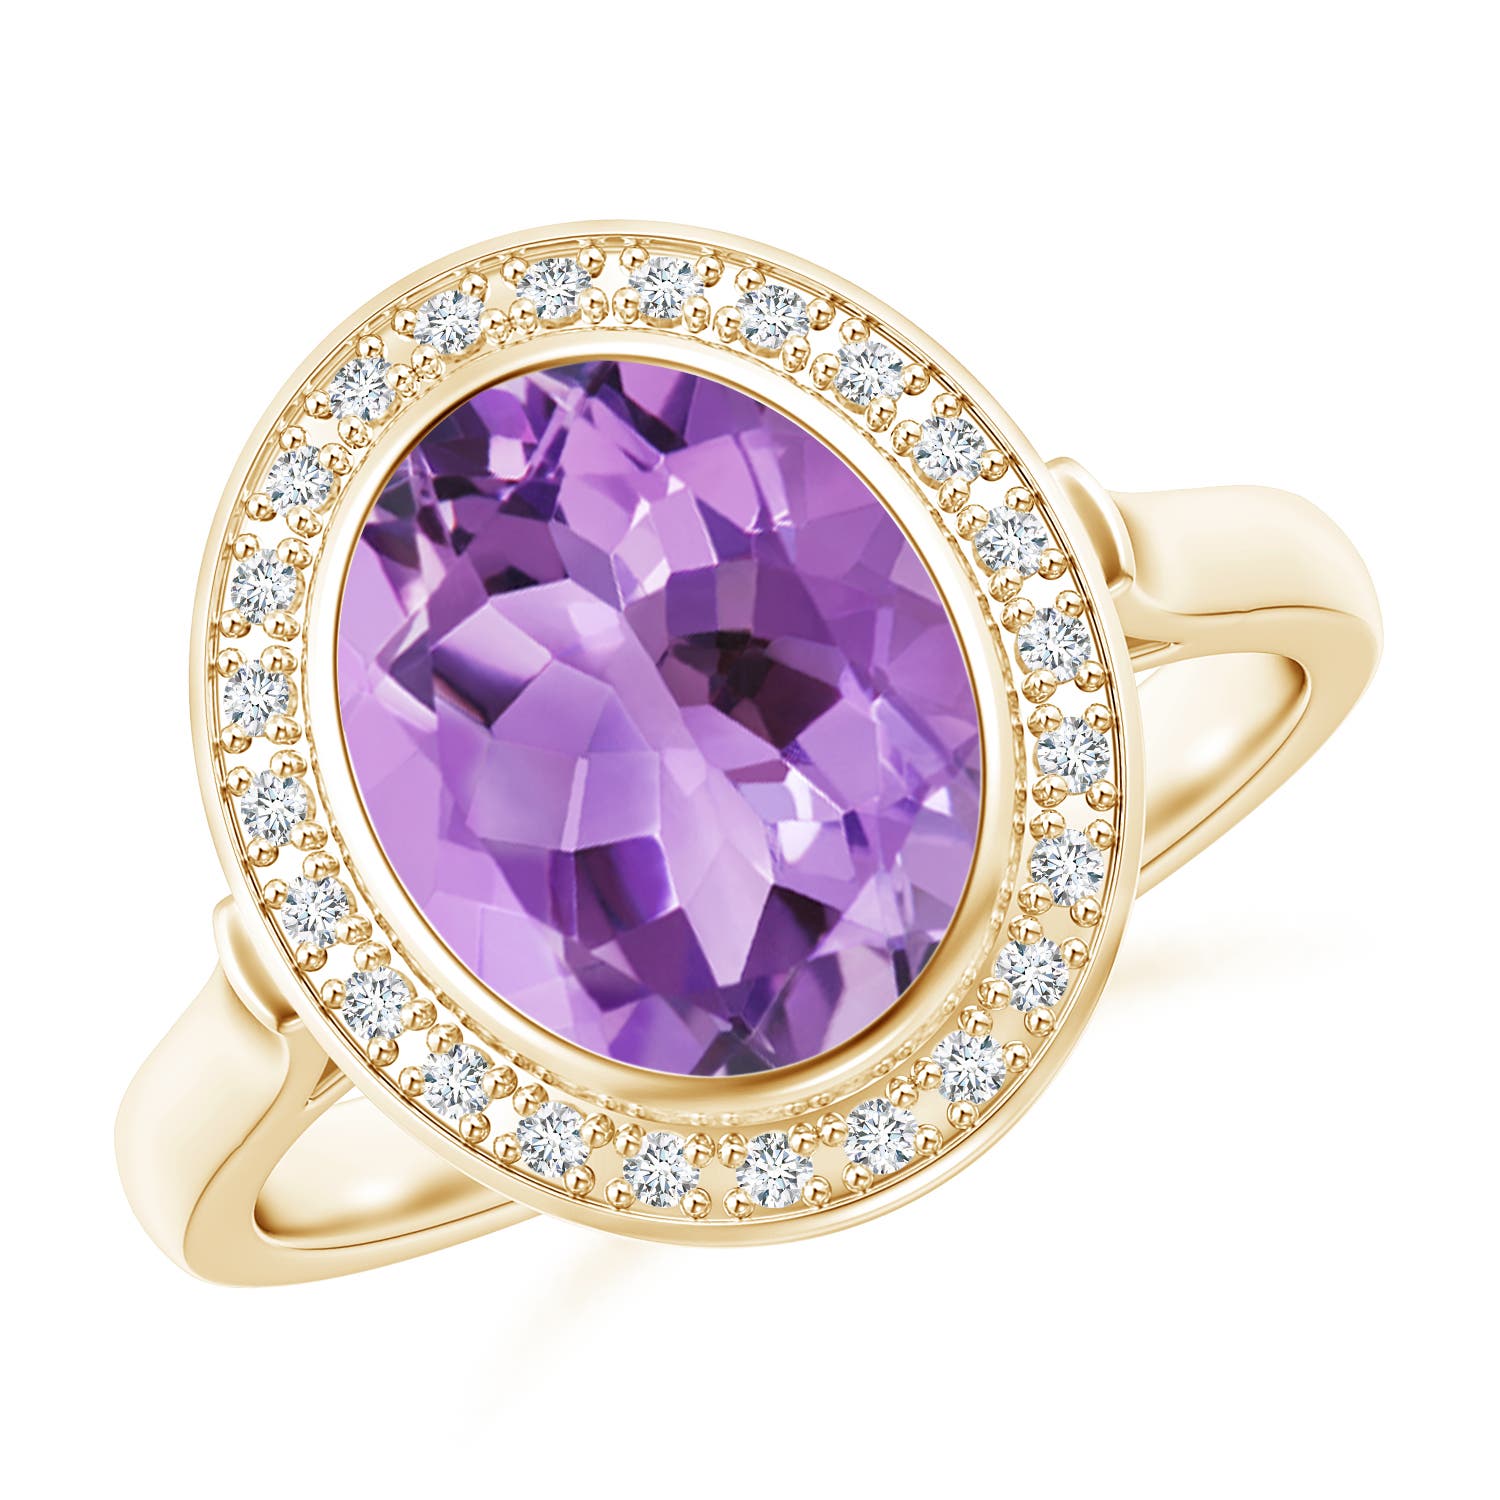 A - Amethyst / 2.44 CT / 14 KT Yellow Gold